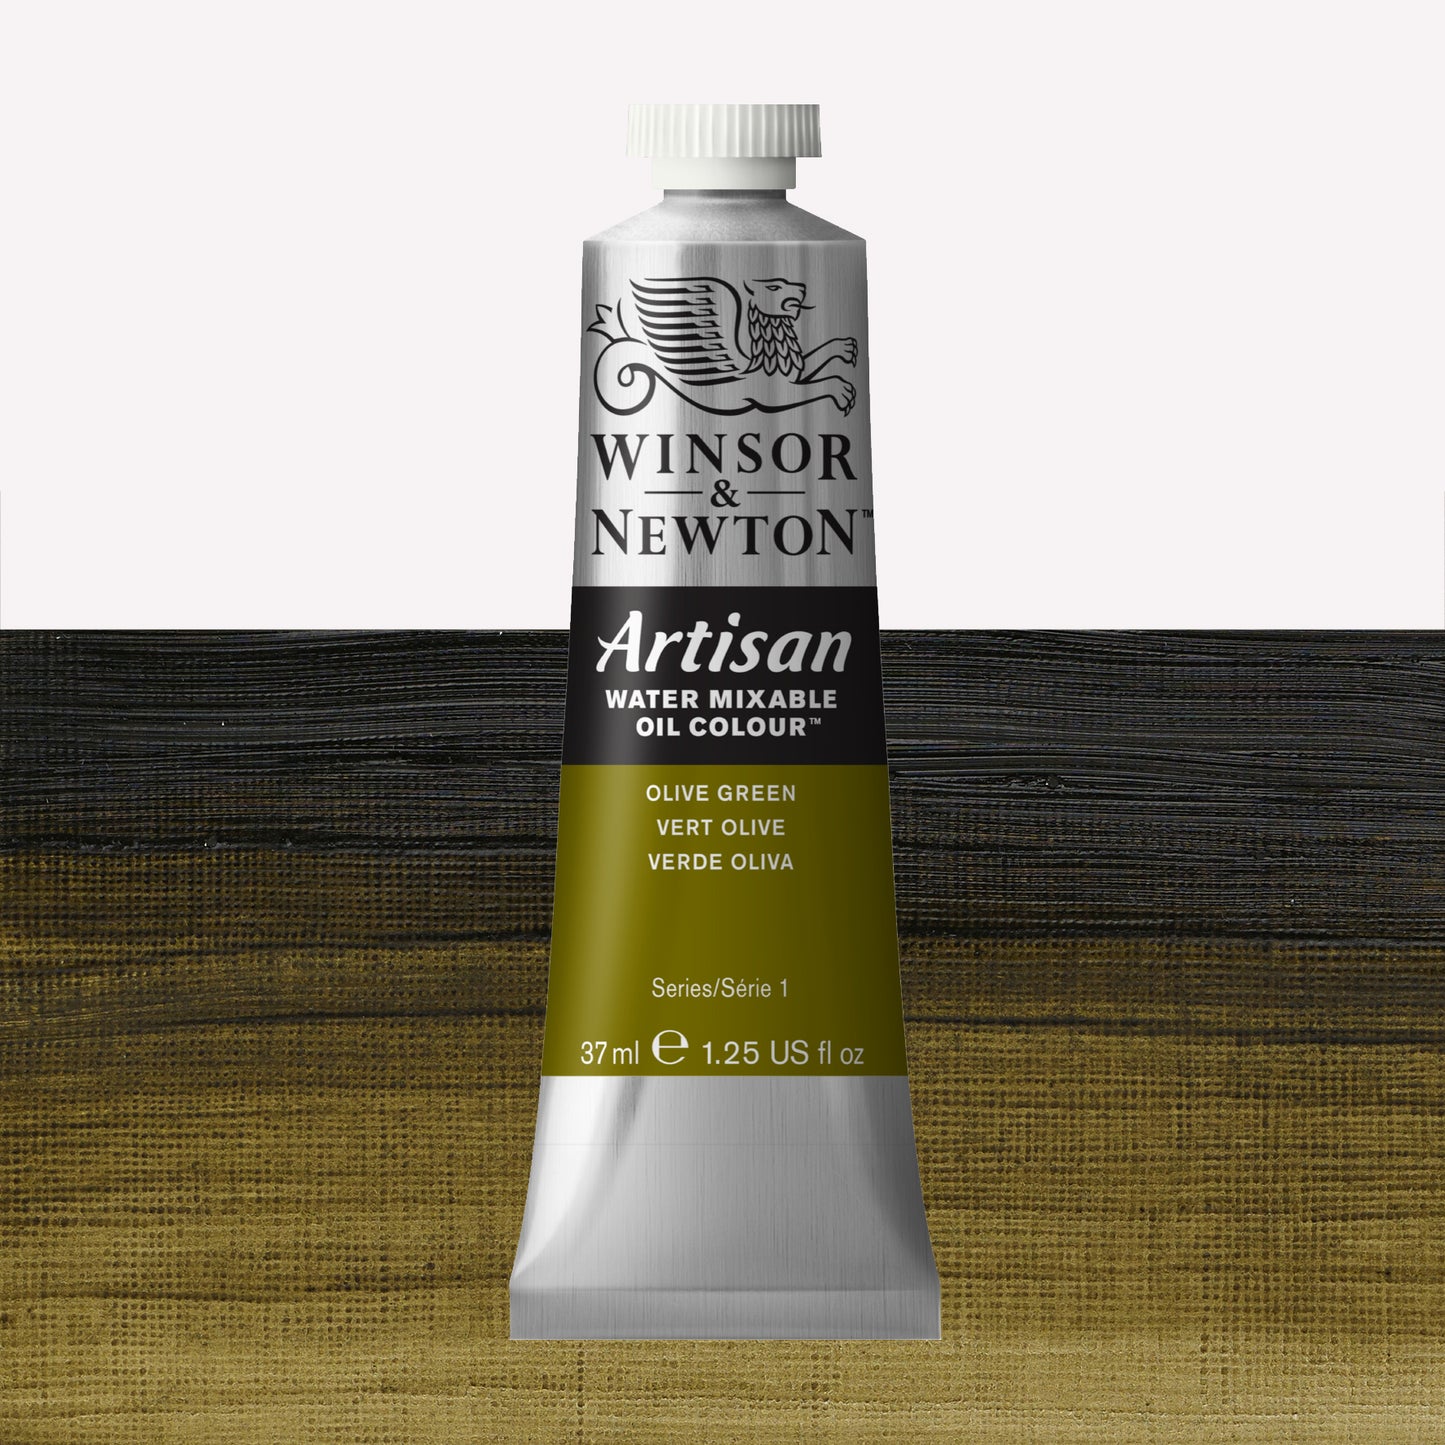 A 37ml silver tube of Winsor & Newton, Artisan Water Mixable Oil Colour in the shade Olive Green, over a beautifully pigmented colour swatch.